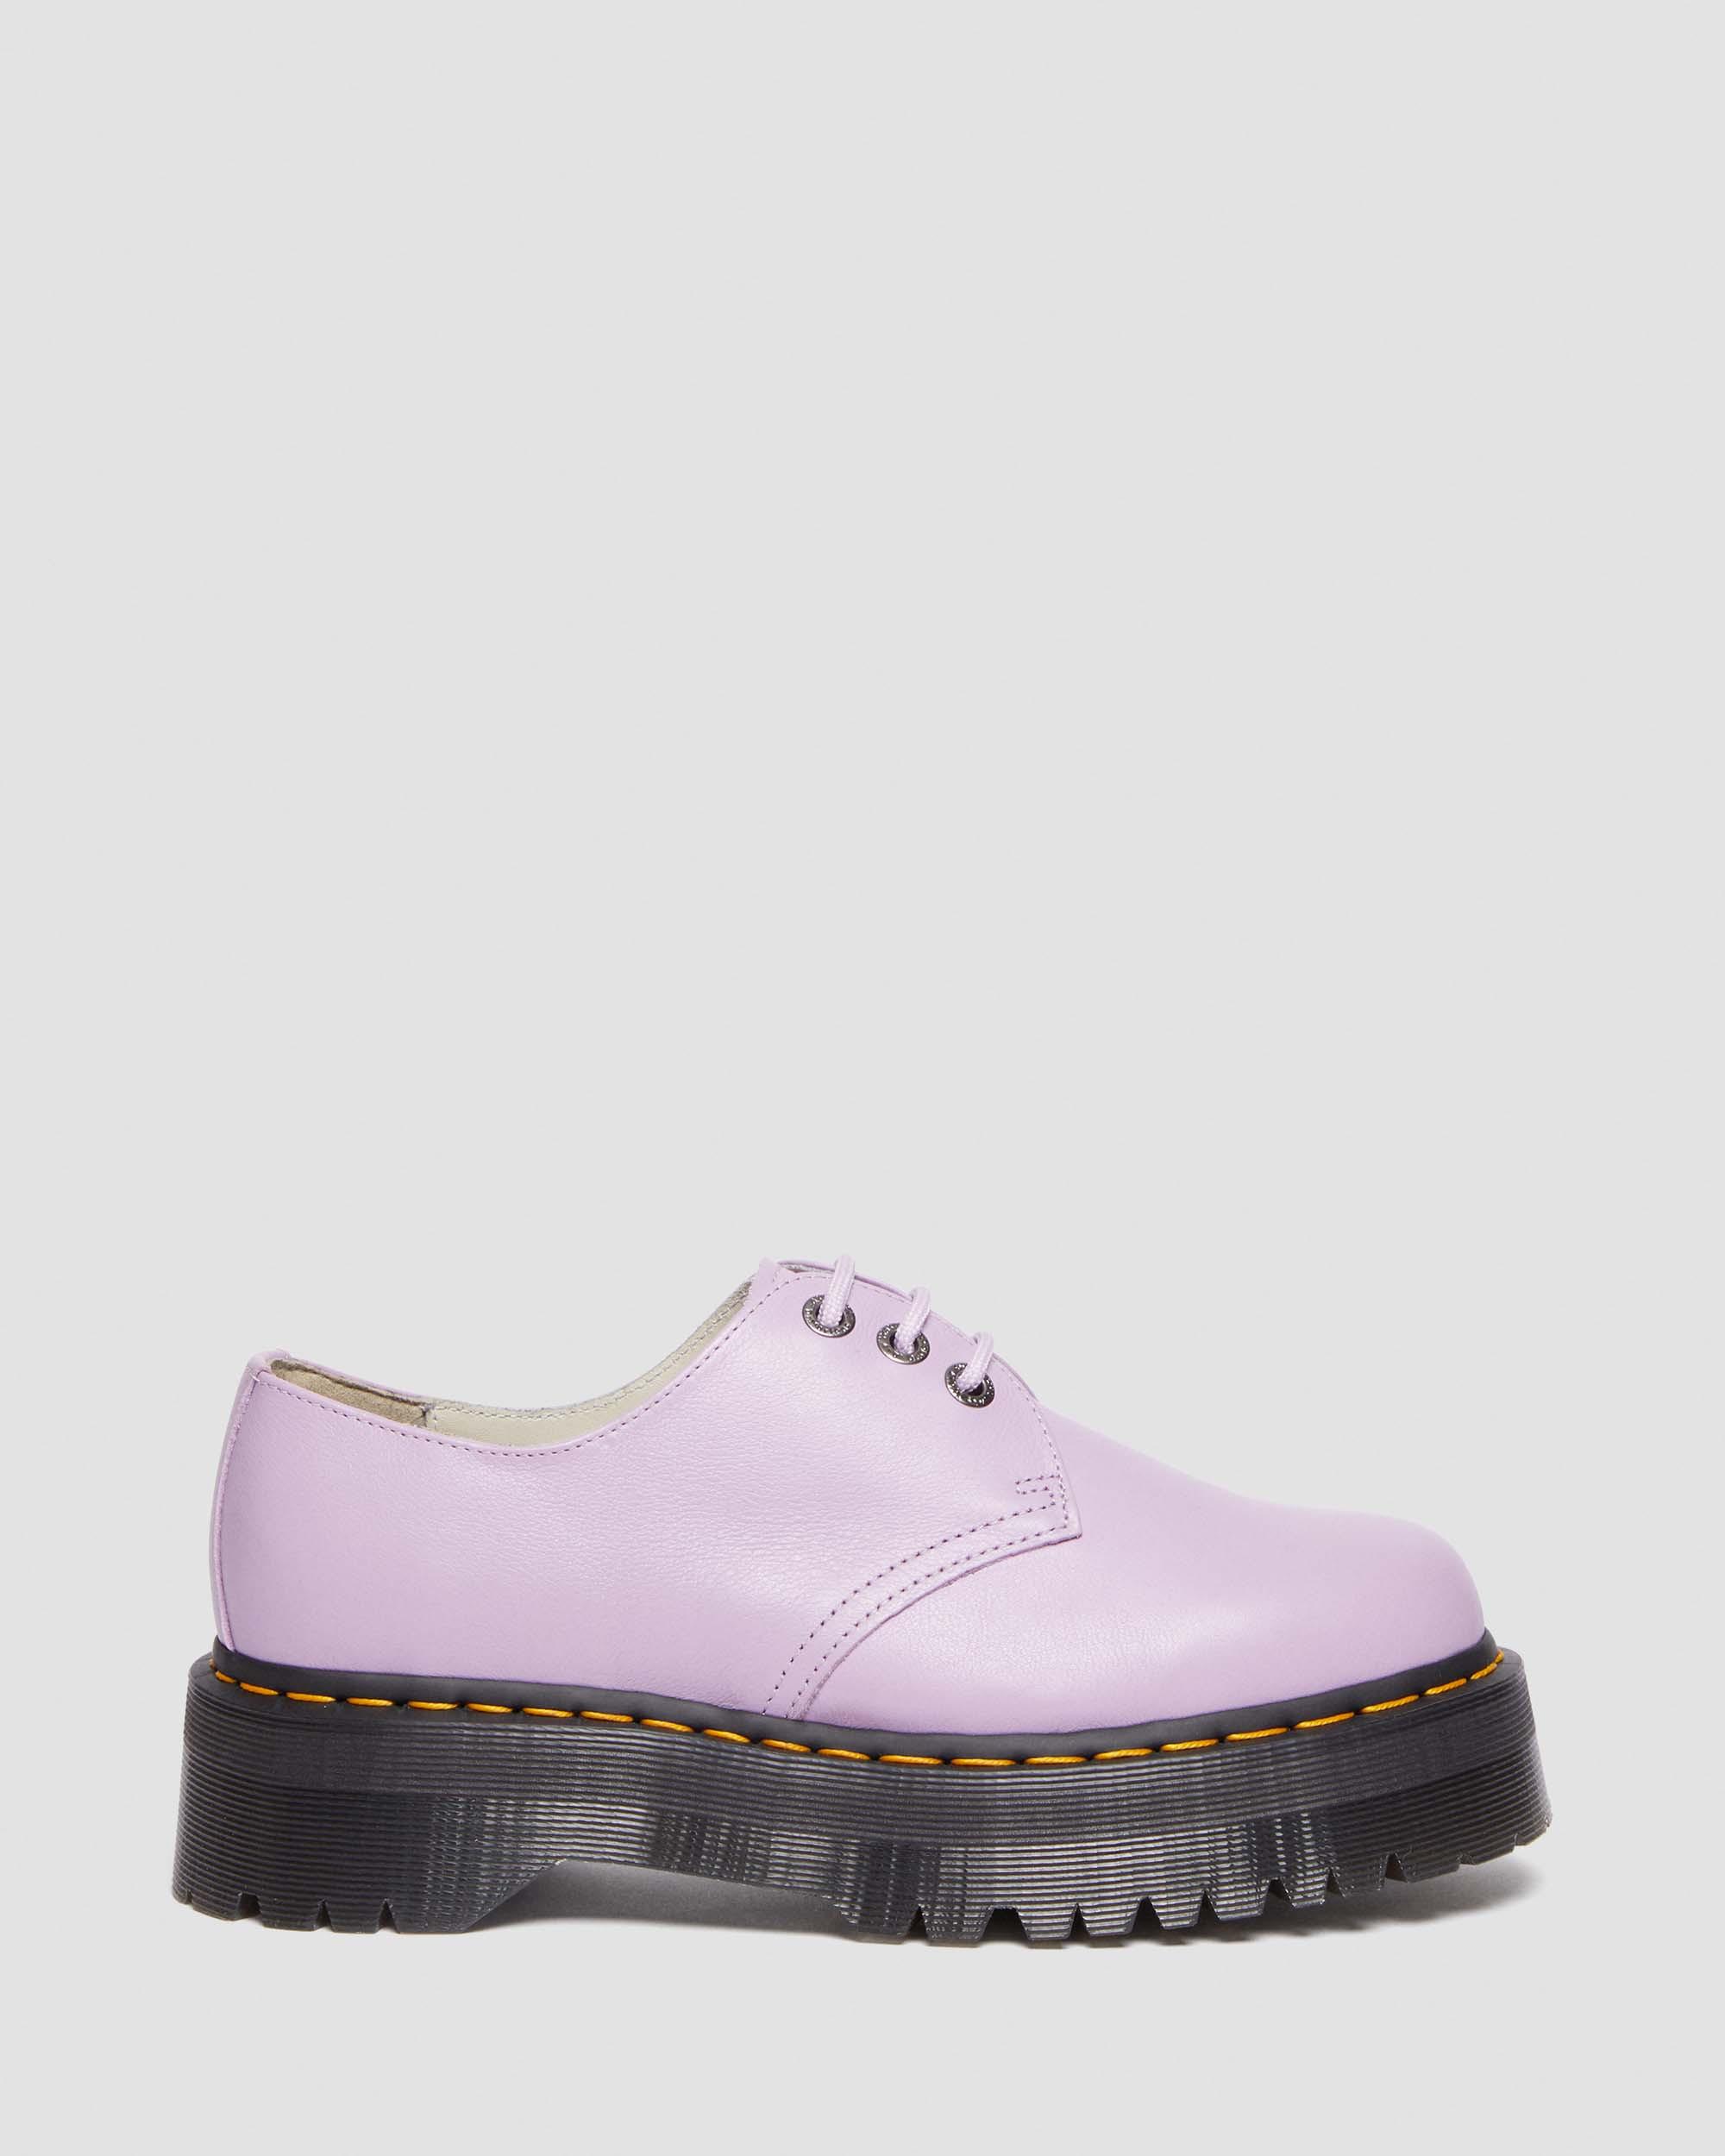 1461 II Pisa Leather Platform Shoes in Lilac